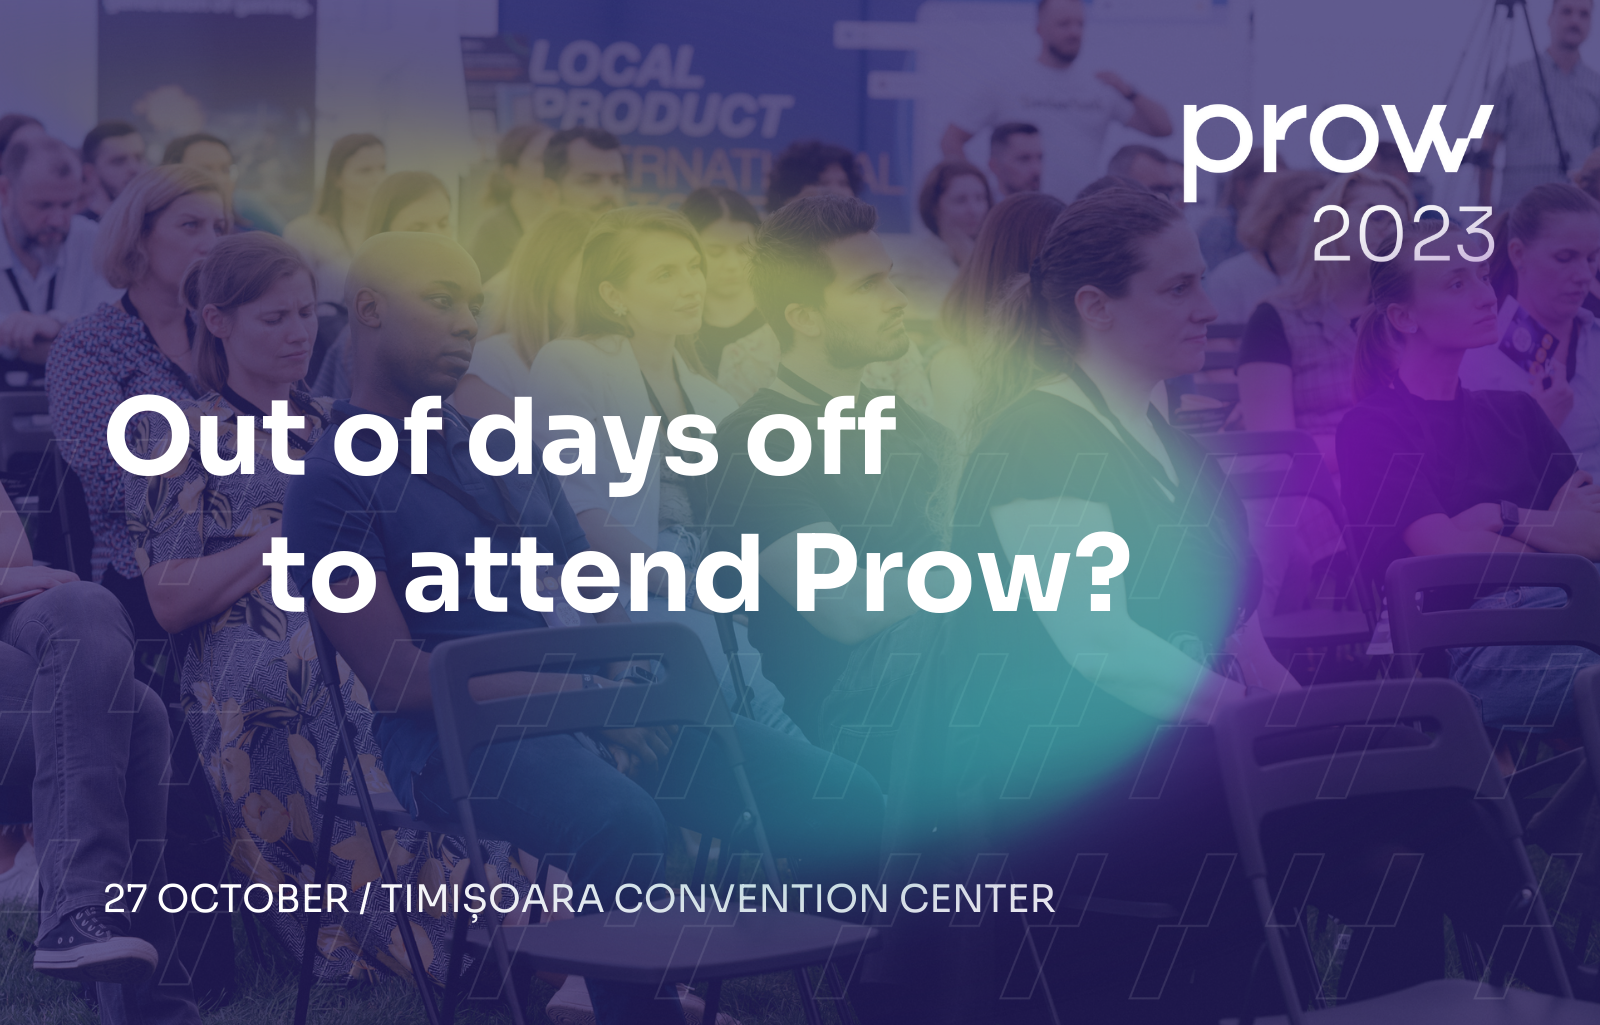 Out of days off to attend Prow?